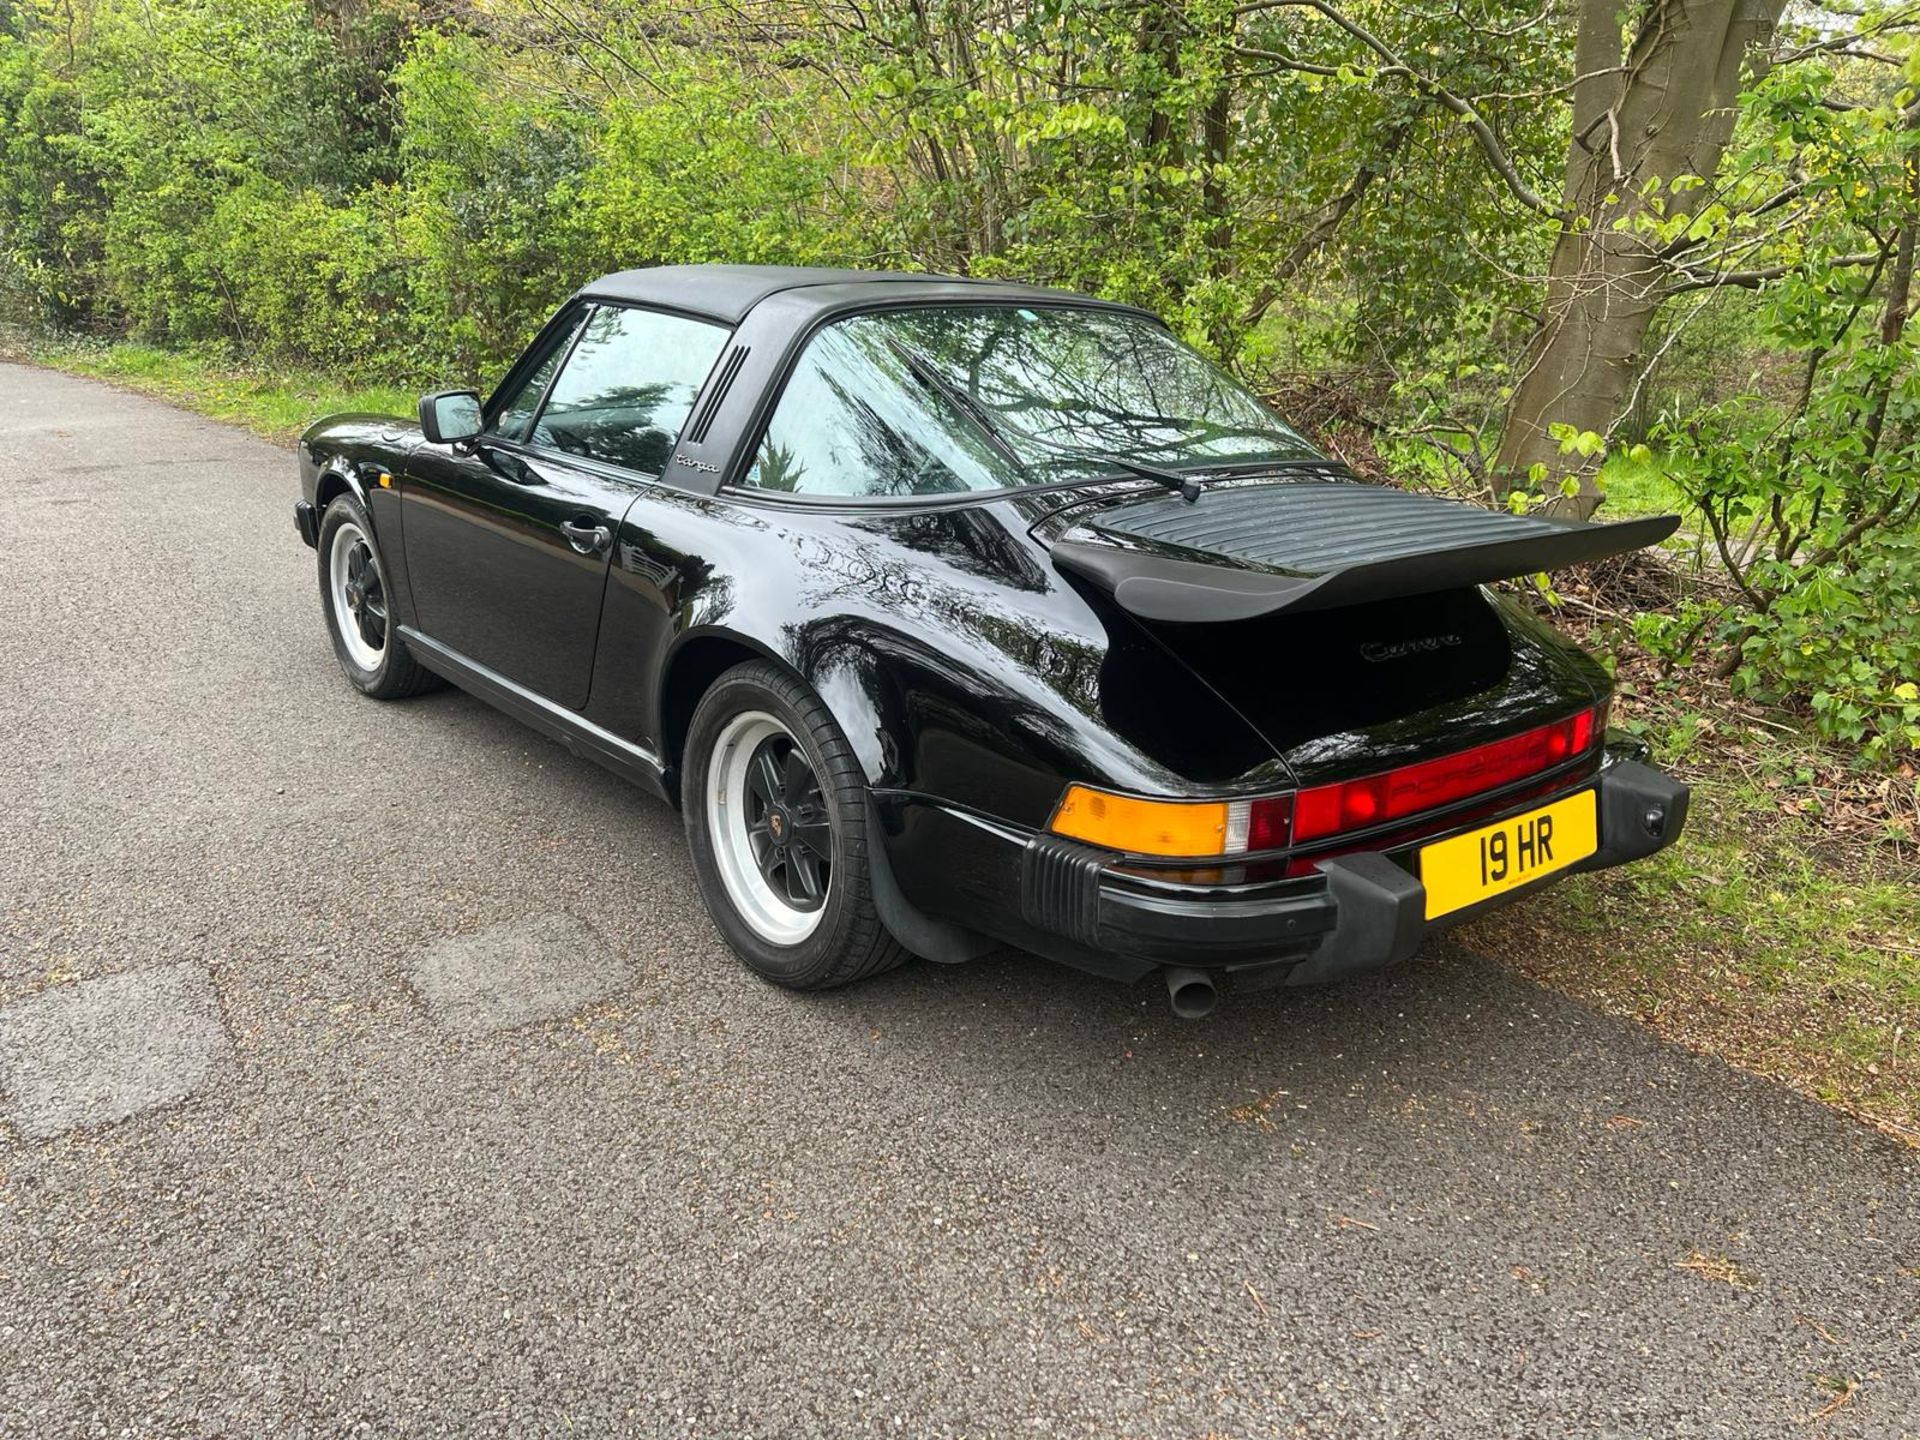 1988 Porsche Carrera Targa 3.2 - 27 yrs ownership, 61,000 miles with only 3500 miles in last 25 yrs - Image 6 of 18